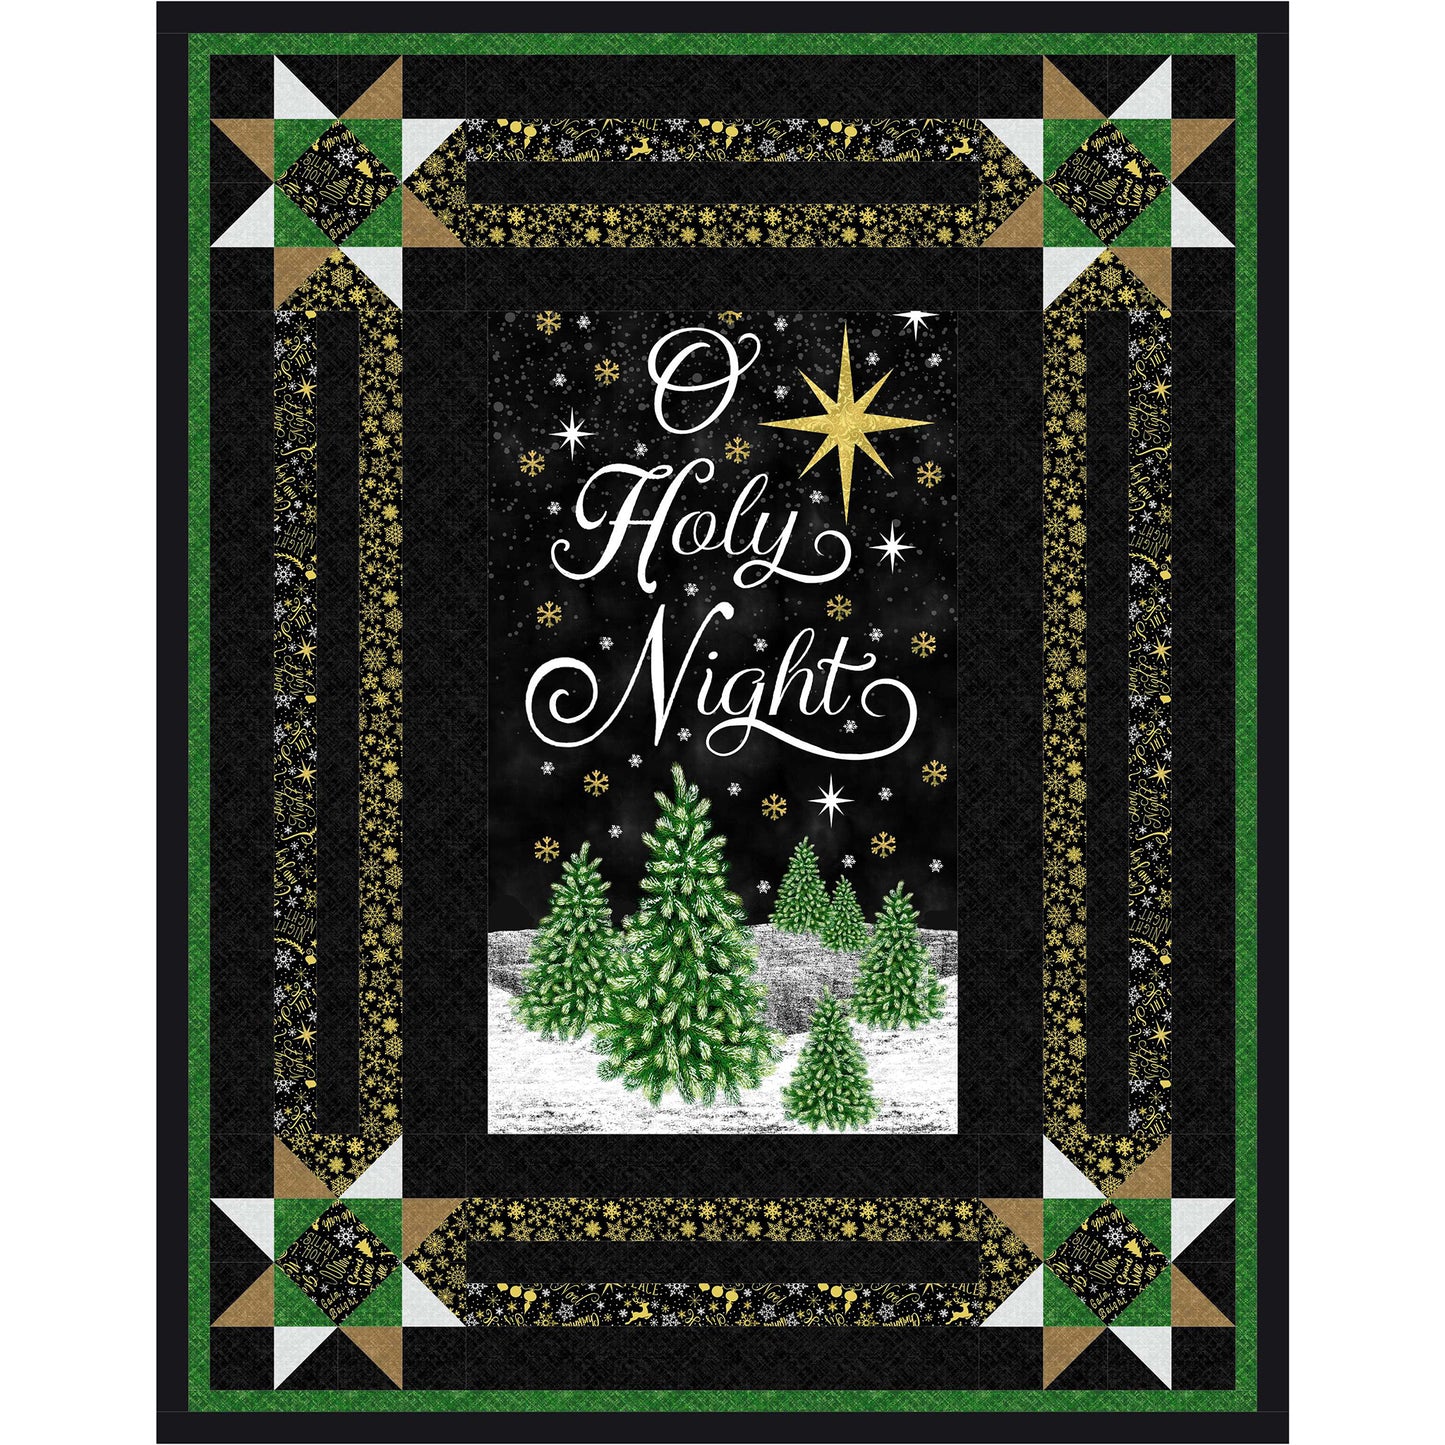 Christmas quilt featuring trees and the words "Holy Night" in festive colors with a pretty border with stars at the corners.